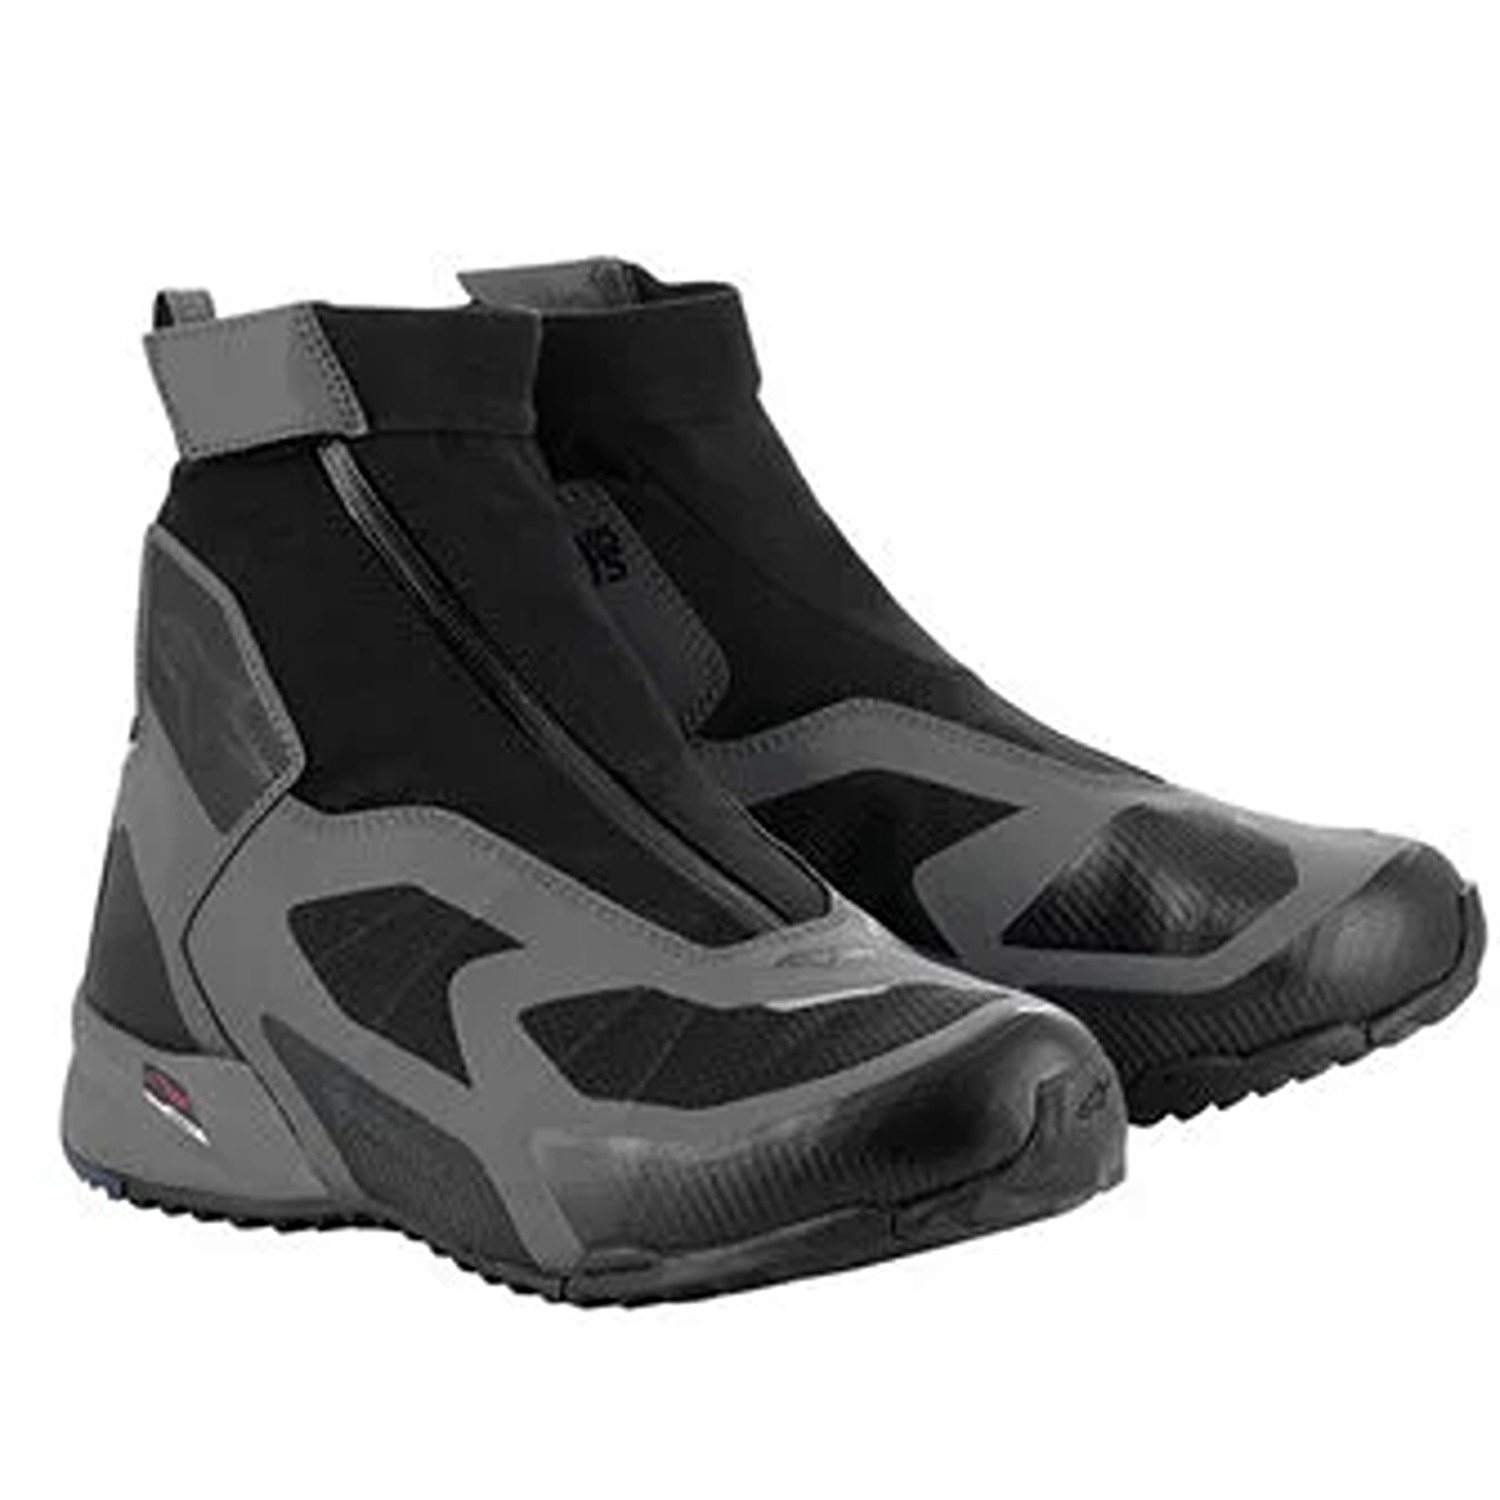 Image of EU Alpinestars CR-8 Gore-Tex Shoes Black Mid Gray Bright Red Taille US 135